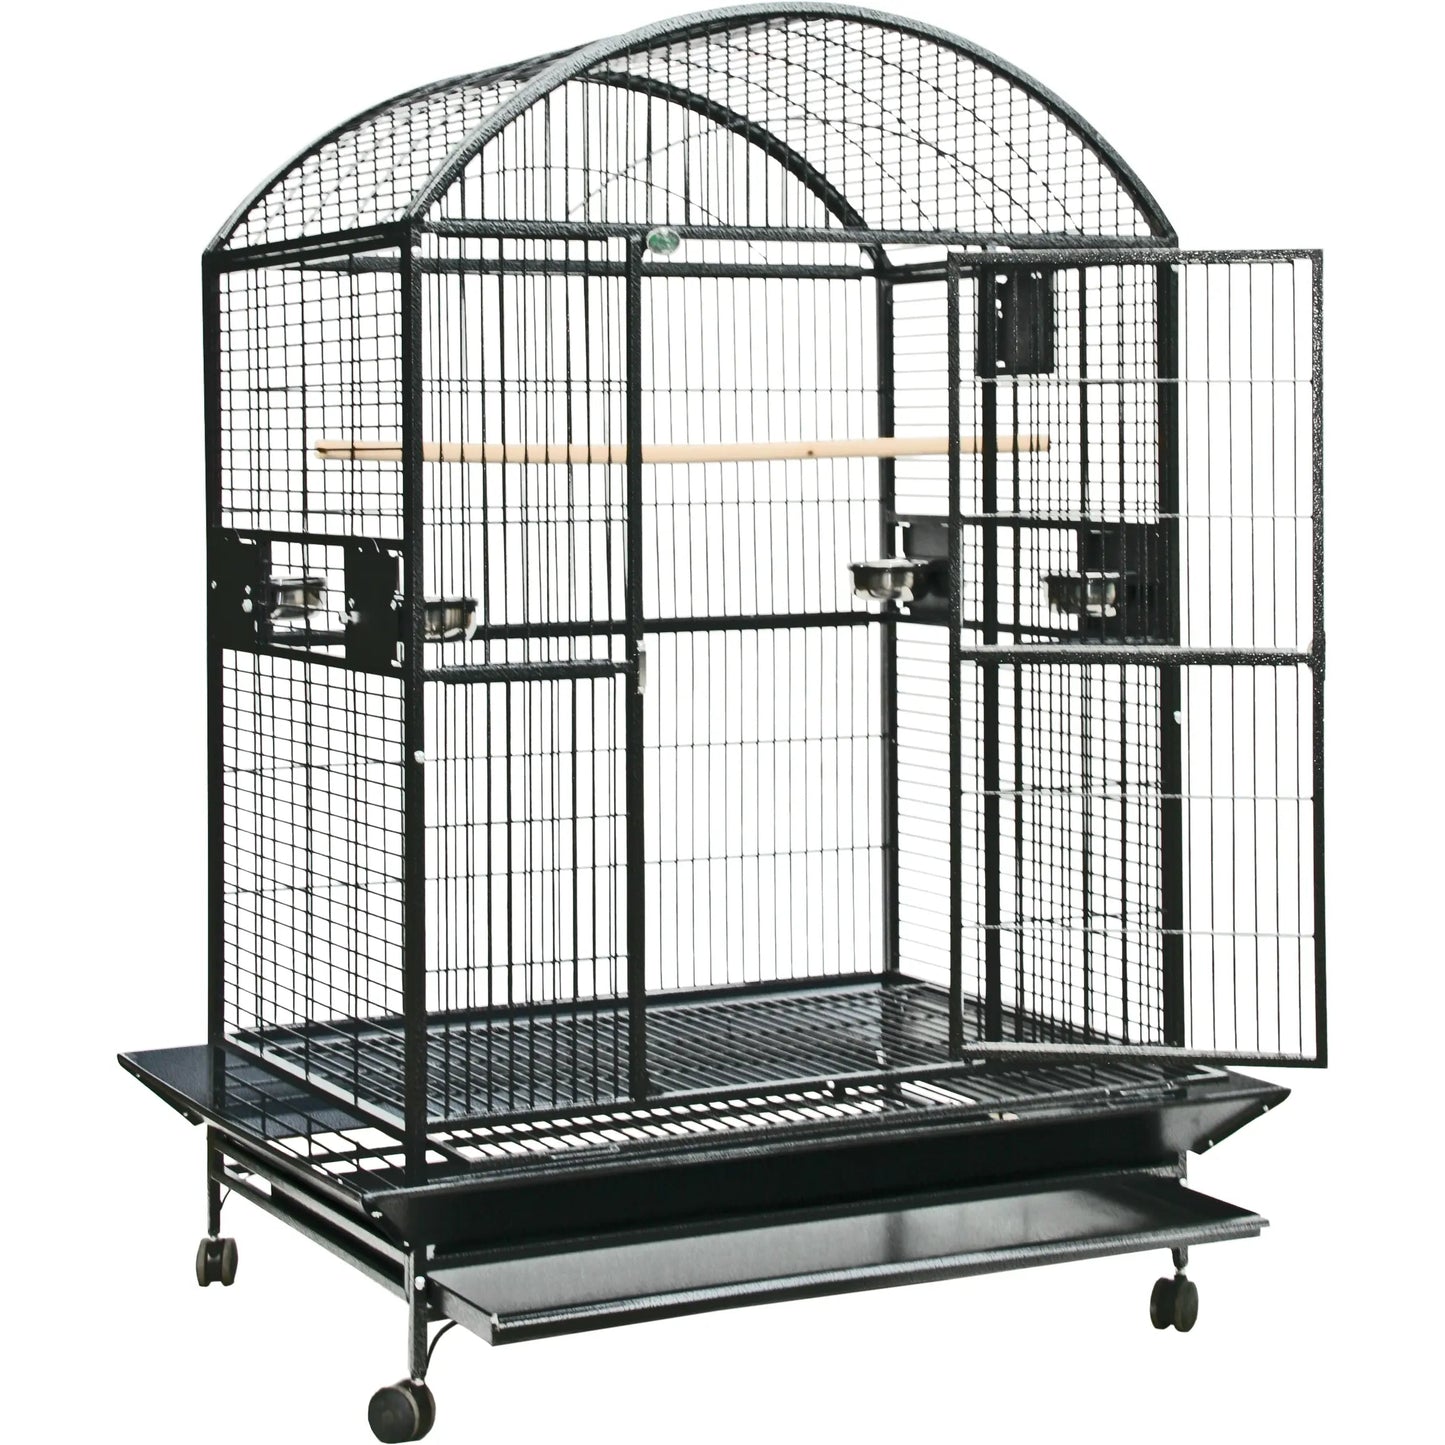 48"x36" Dome Top Cage with 1" Bar Spacing - PremiumPetsPlus